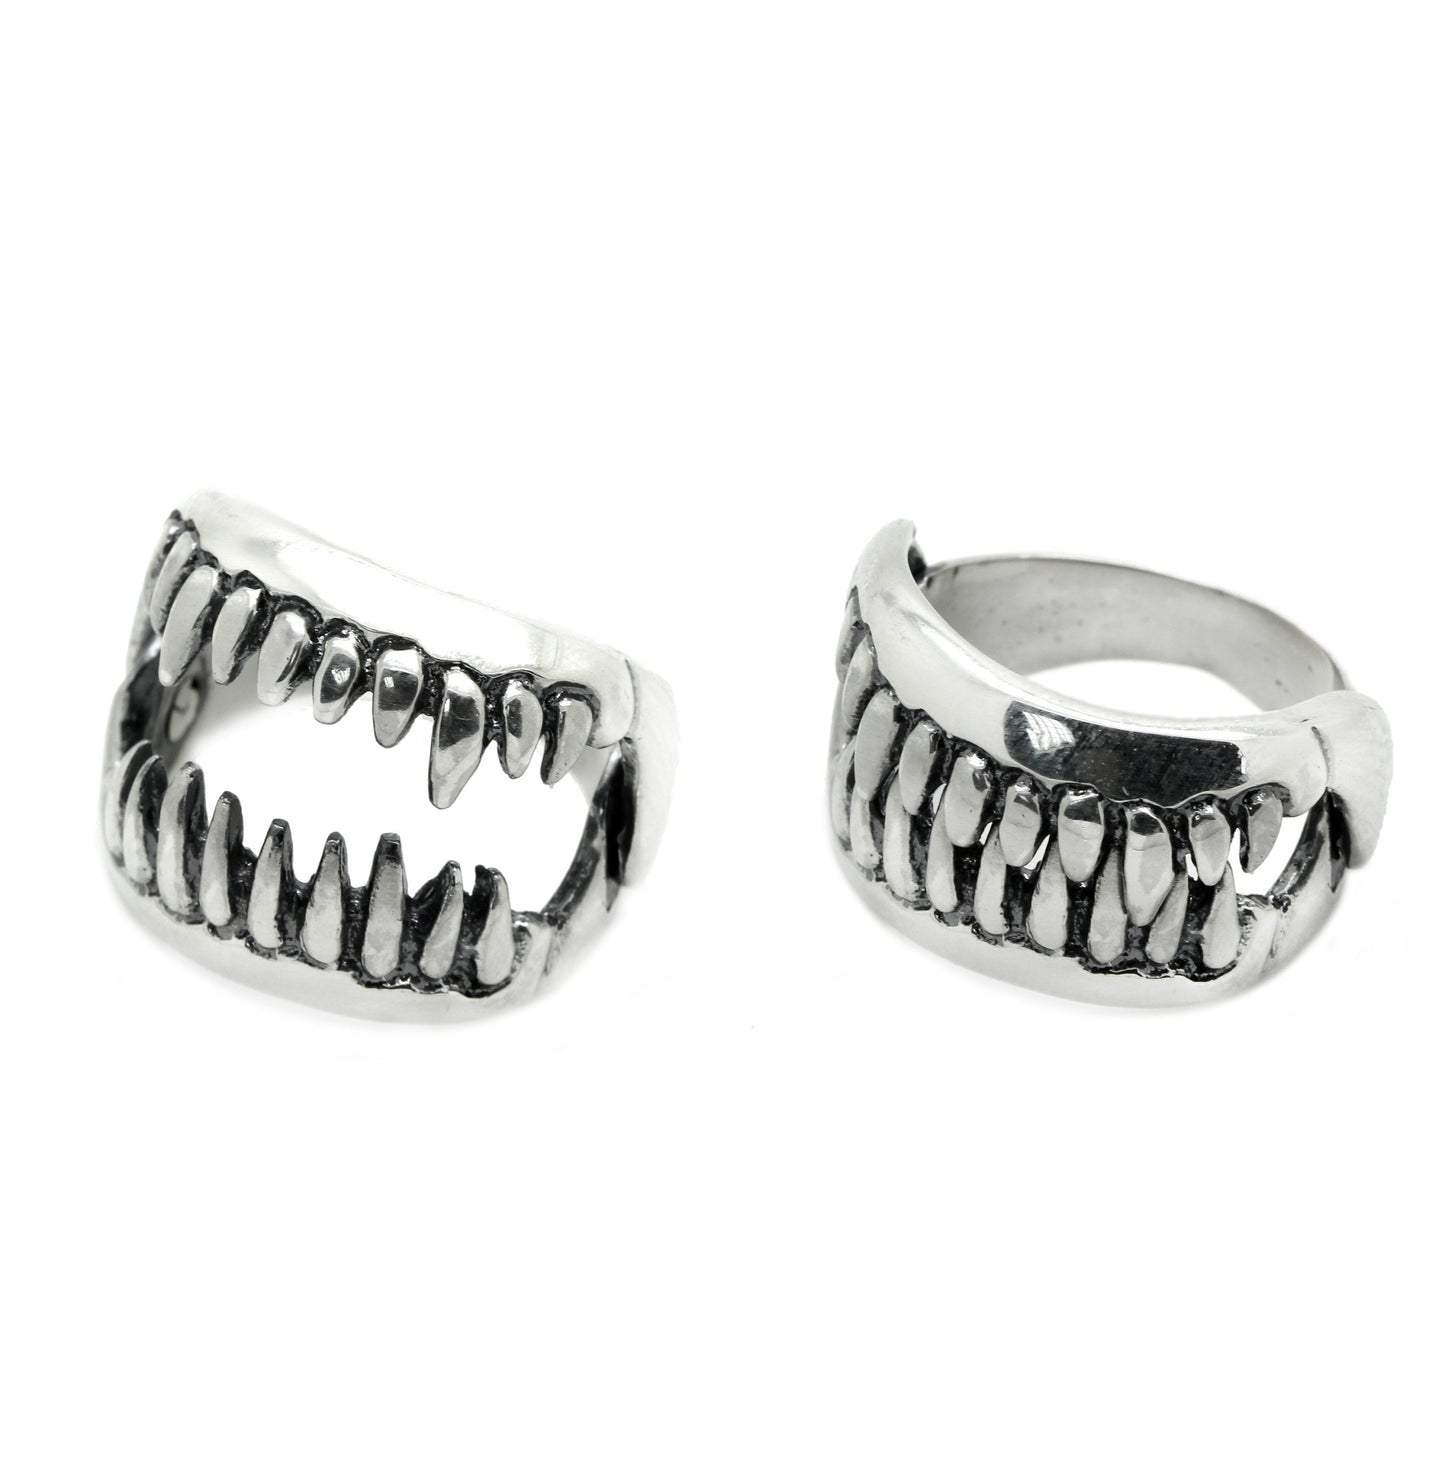 Moving Jaw Unisex Ring Silver 925